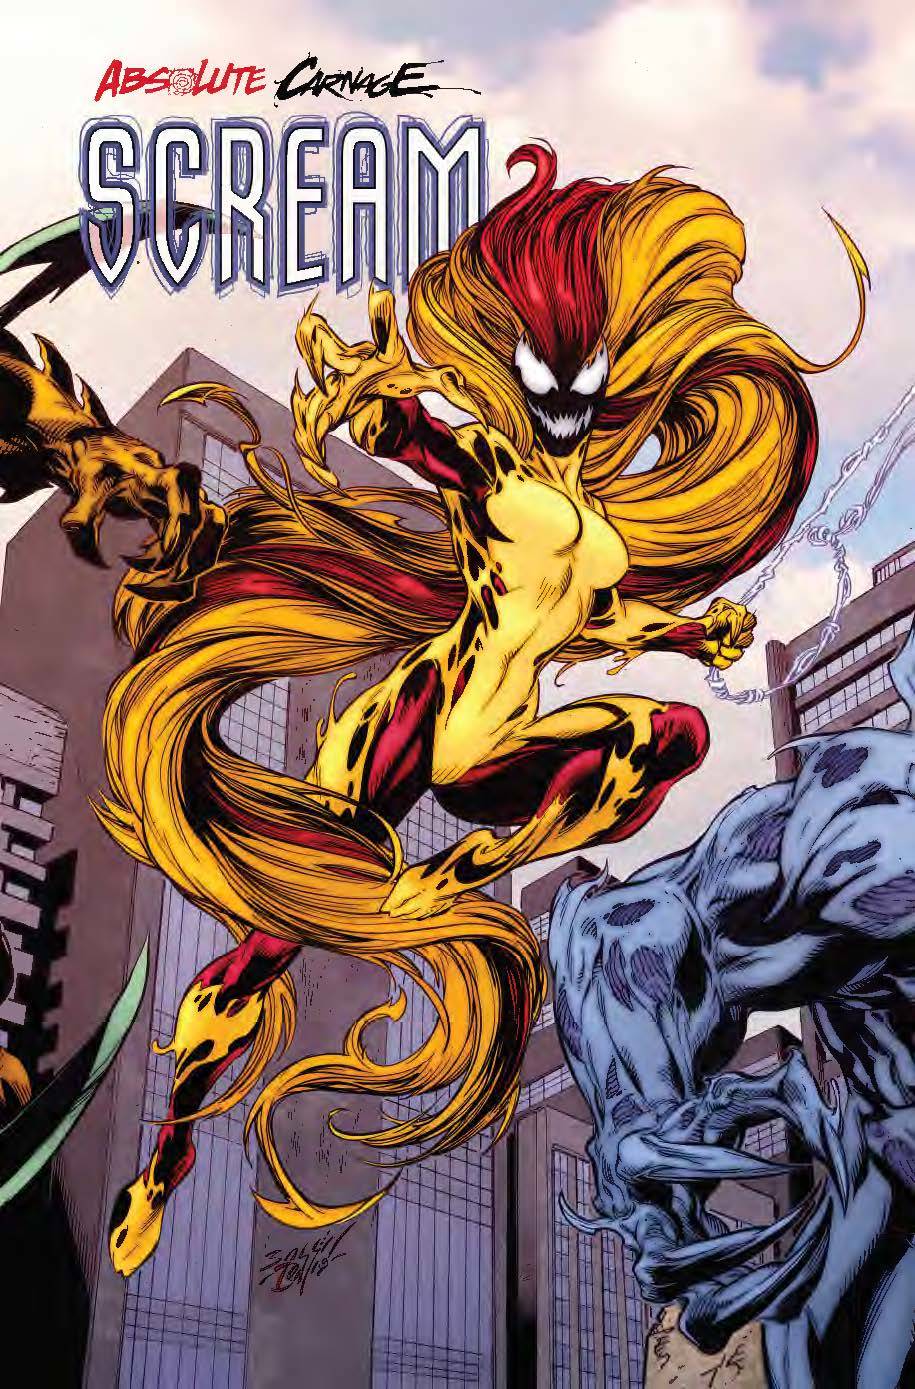 ABSOLUTE CARNAGE SCREAM #2 (OF 3) BAGLEY CONNECTING VAR AC 2019